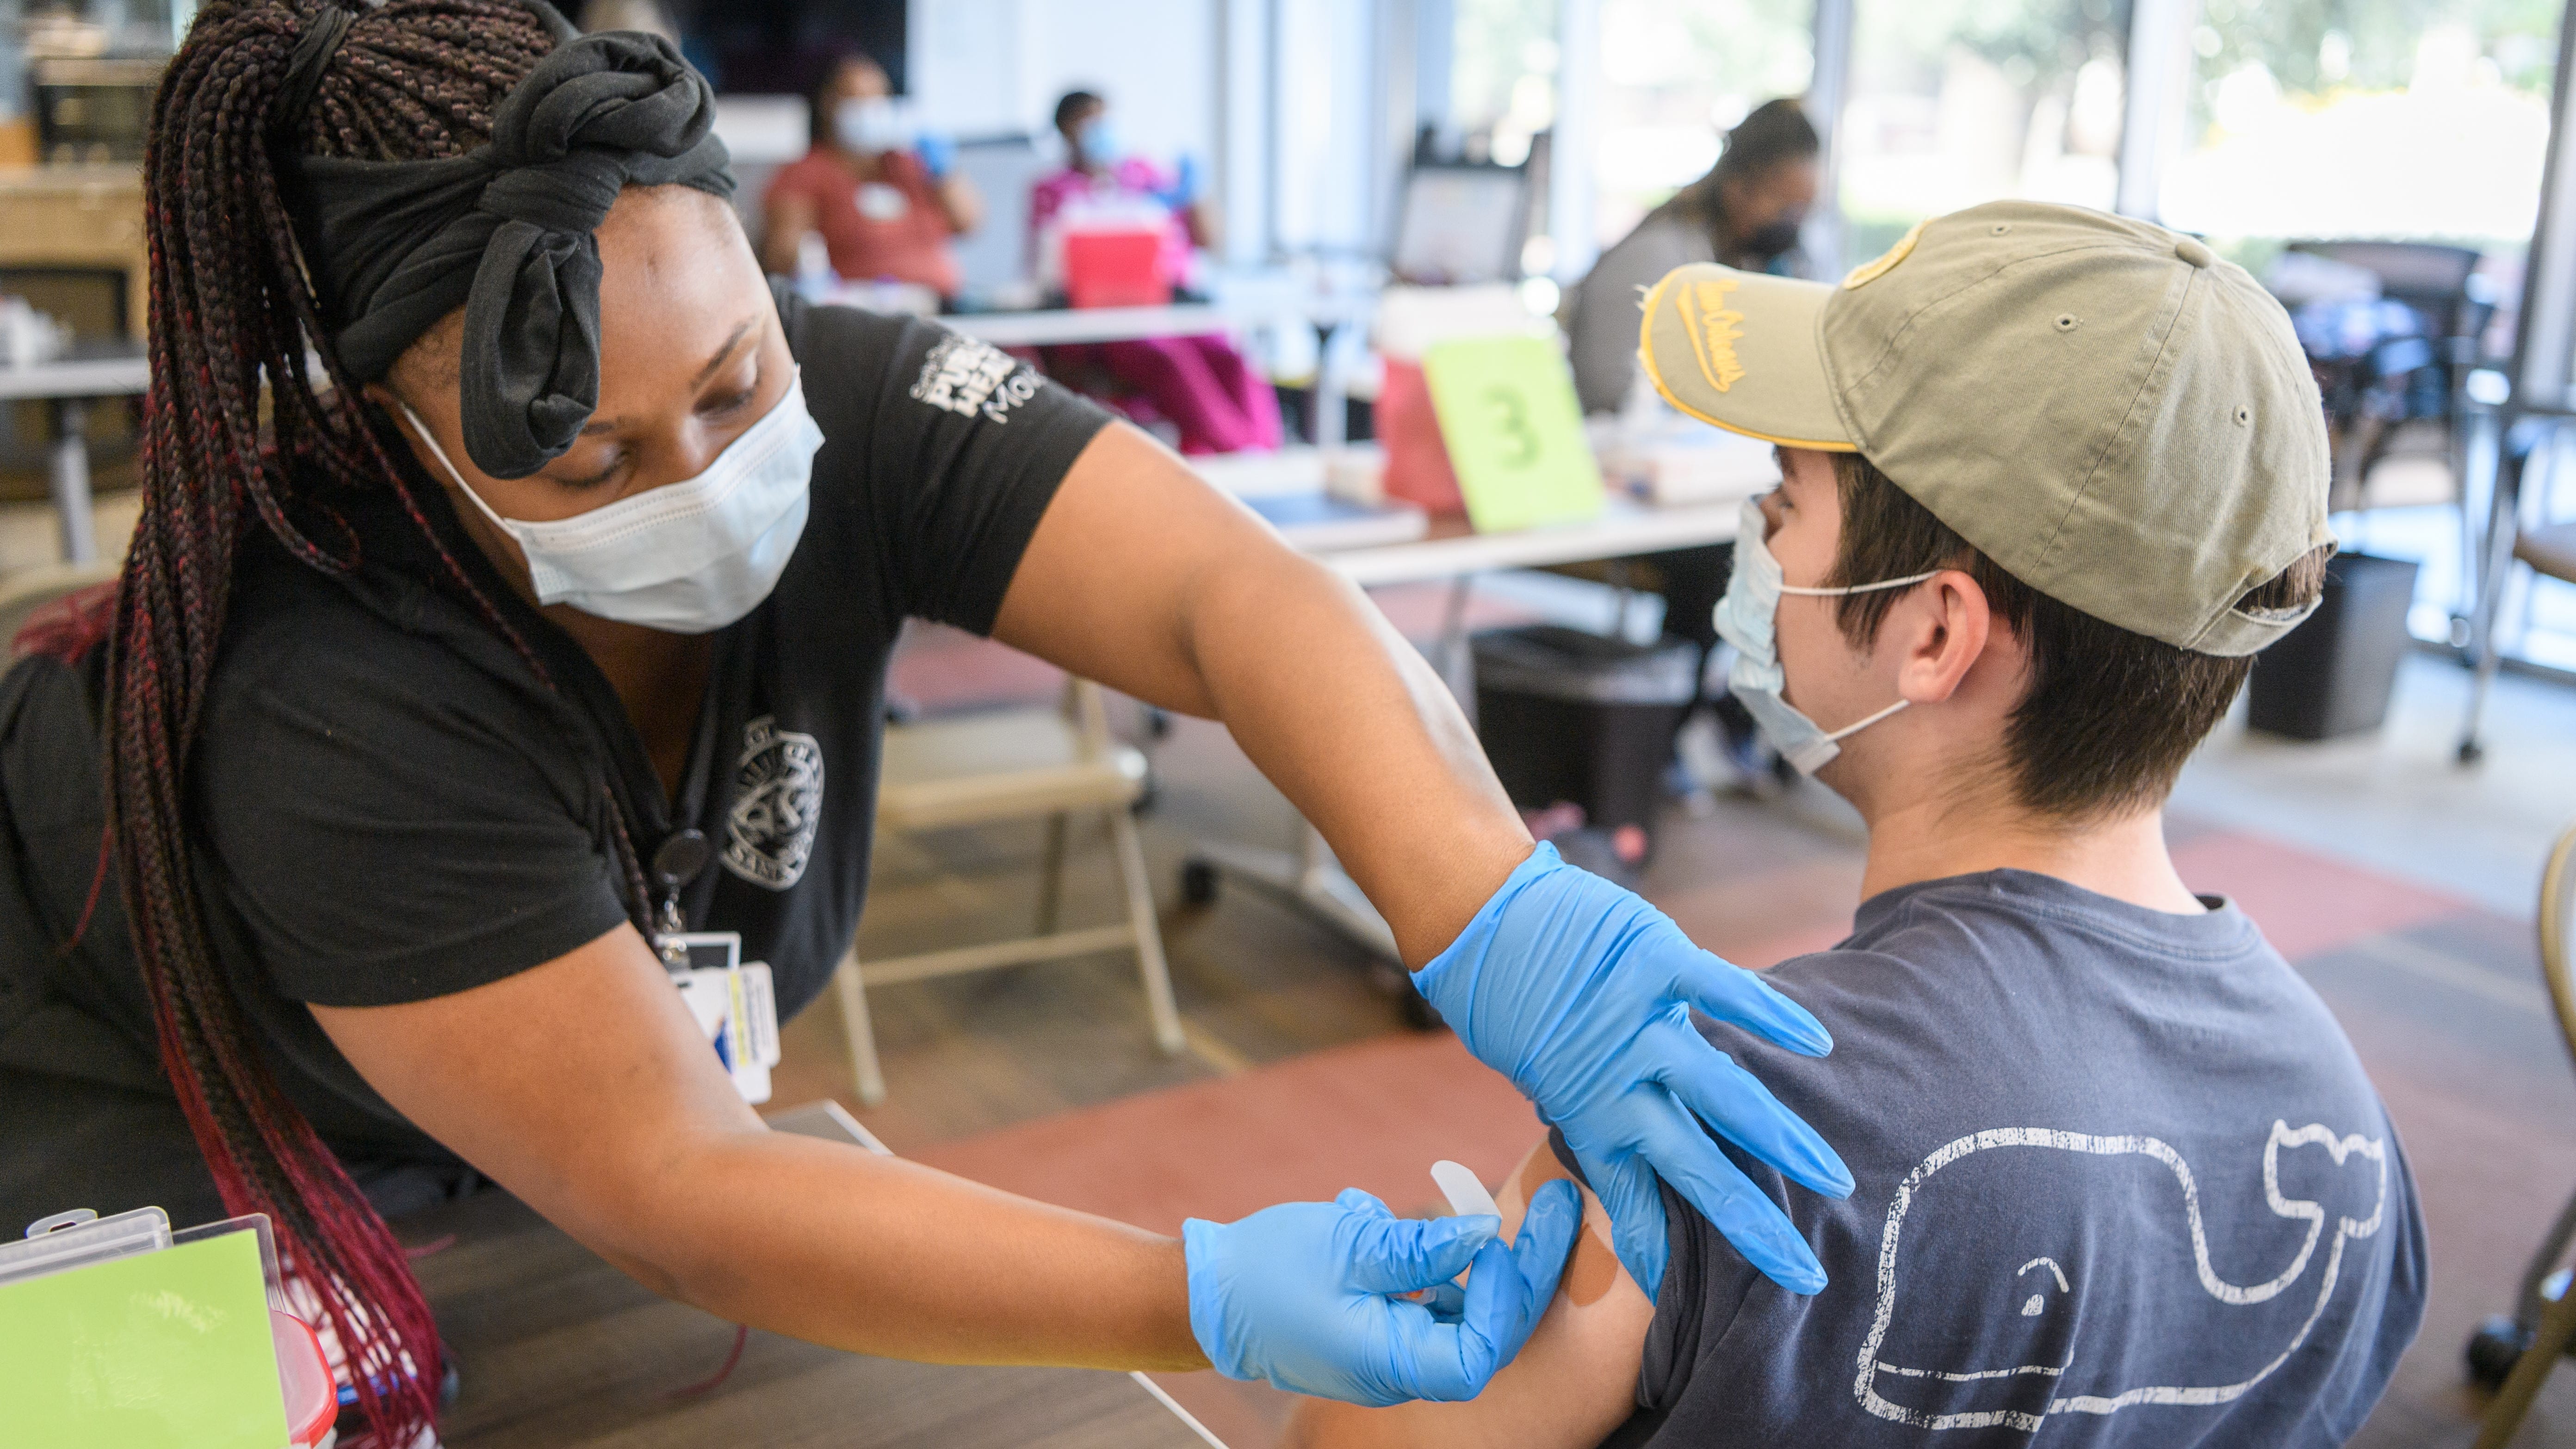 SJSU public health volunteer administering a vaccine to a student